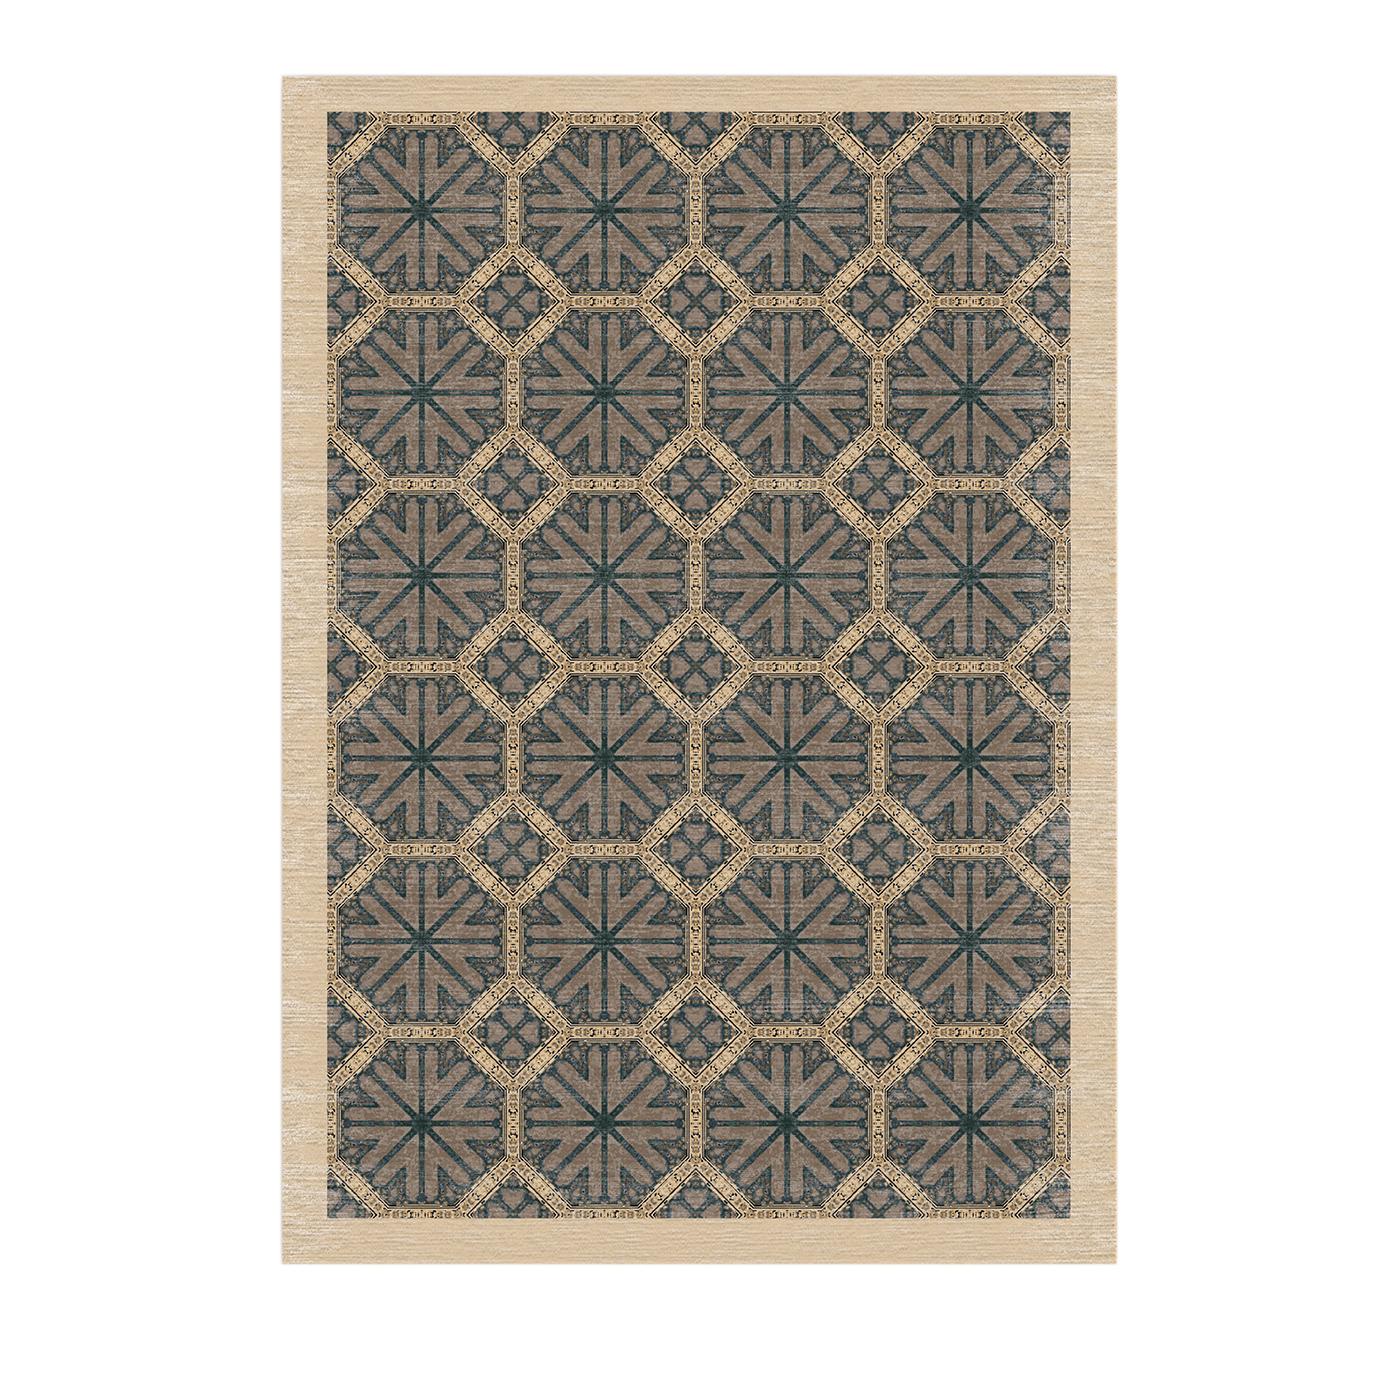 A dynamic composition, this stunning, hand knotted rug evokes the whimsical elegance of kaleidoscope shapes. The piece, made of wool and bamboo fibers, features an interlocking design of alluring geometric forms, composed of large, snowflake-like